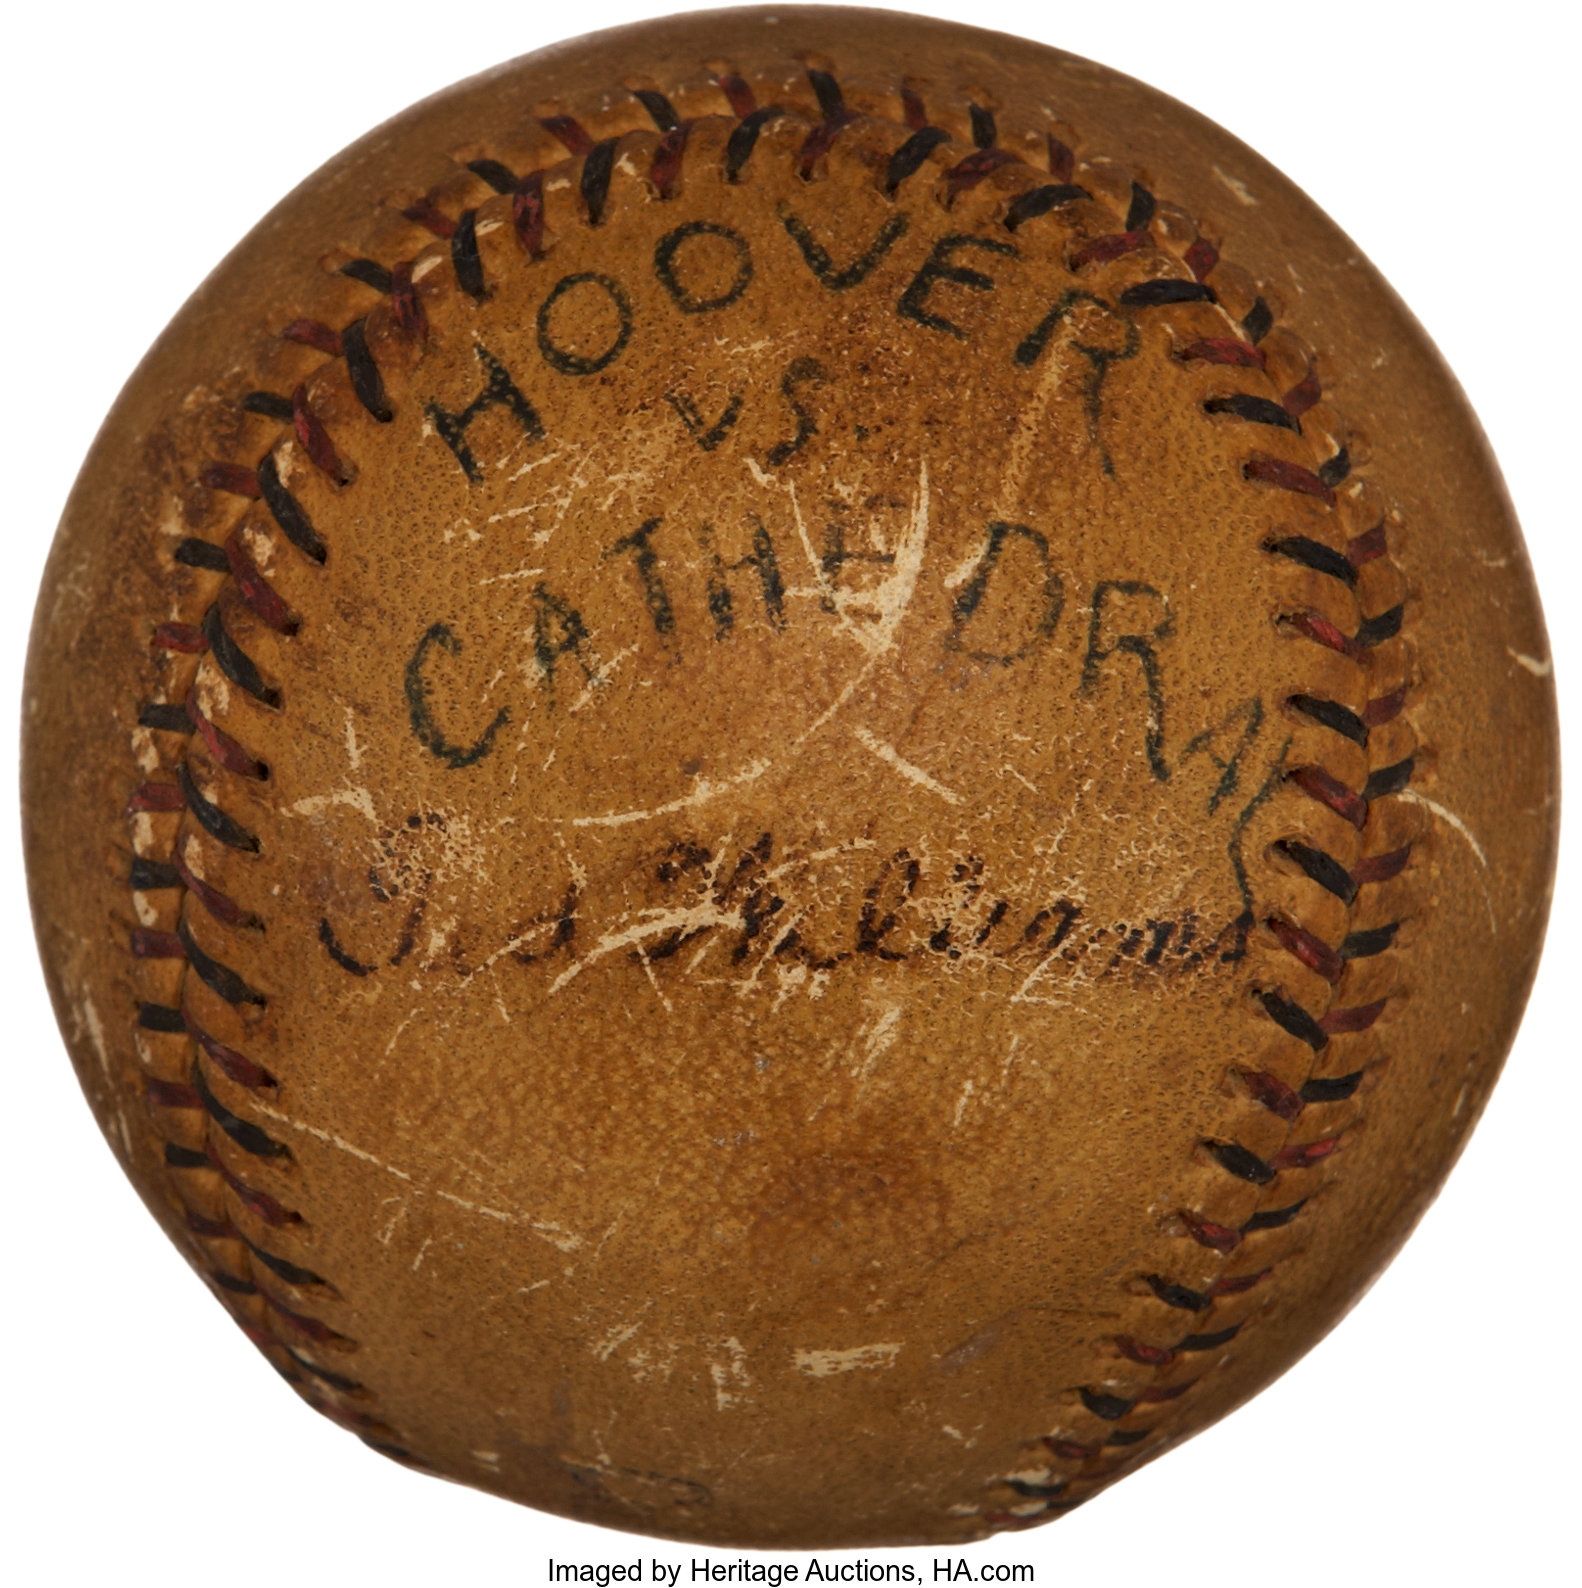 Vintage Autographed Baseball Of Ted Williams Auction